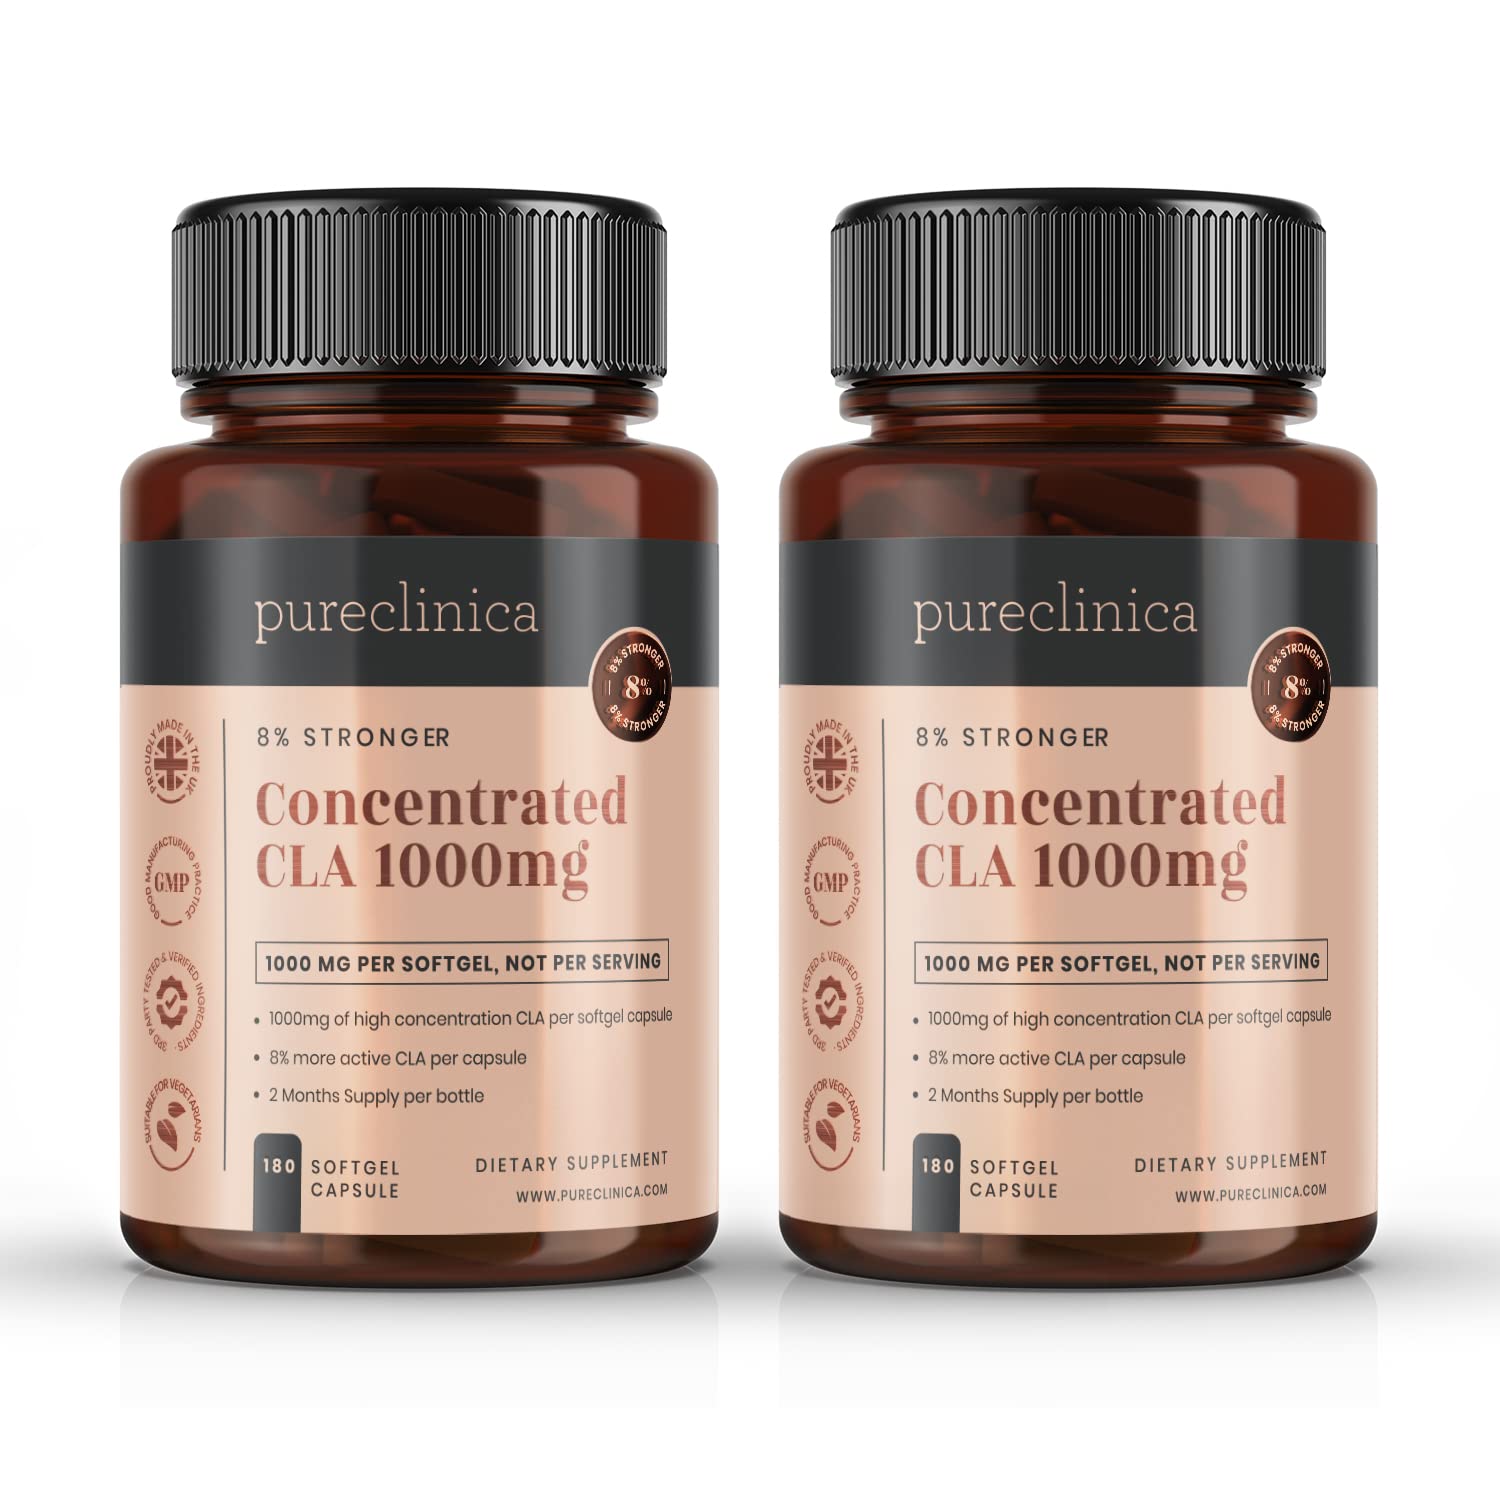 Pureclinica Concentrated CLA 1000mg 4 Months Supply 84% Rich Conjugated Linoleic Acid. The strongest CLA available, burns stubborn abdominal fat by Pureclinica